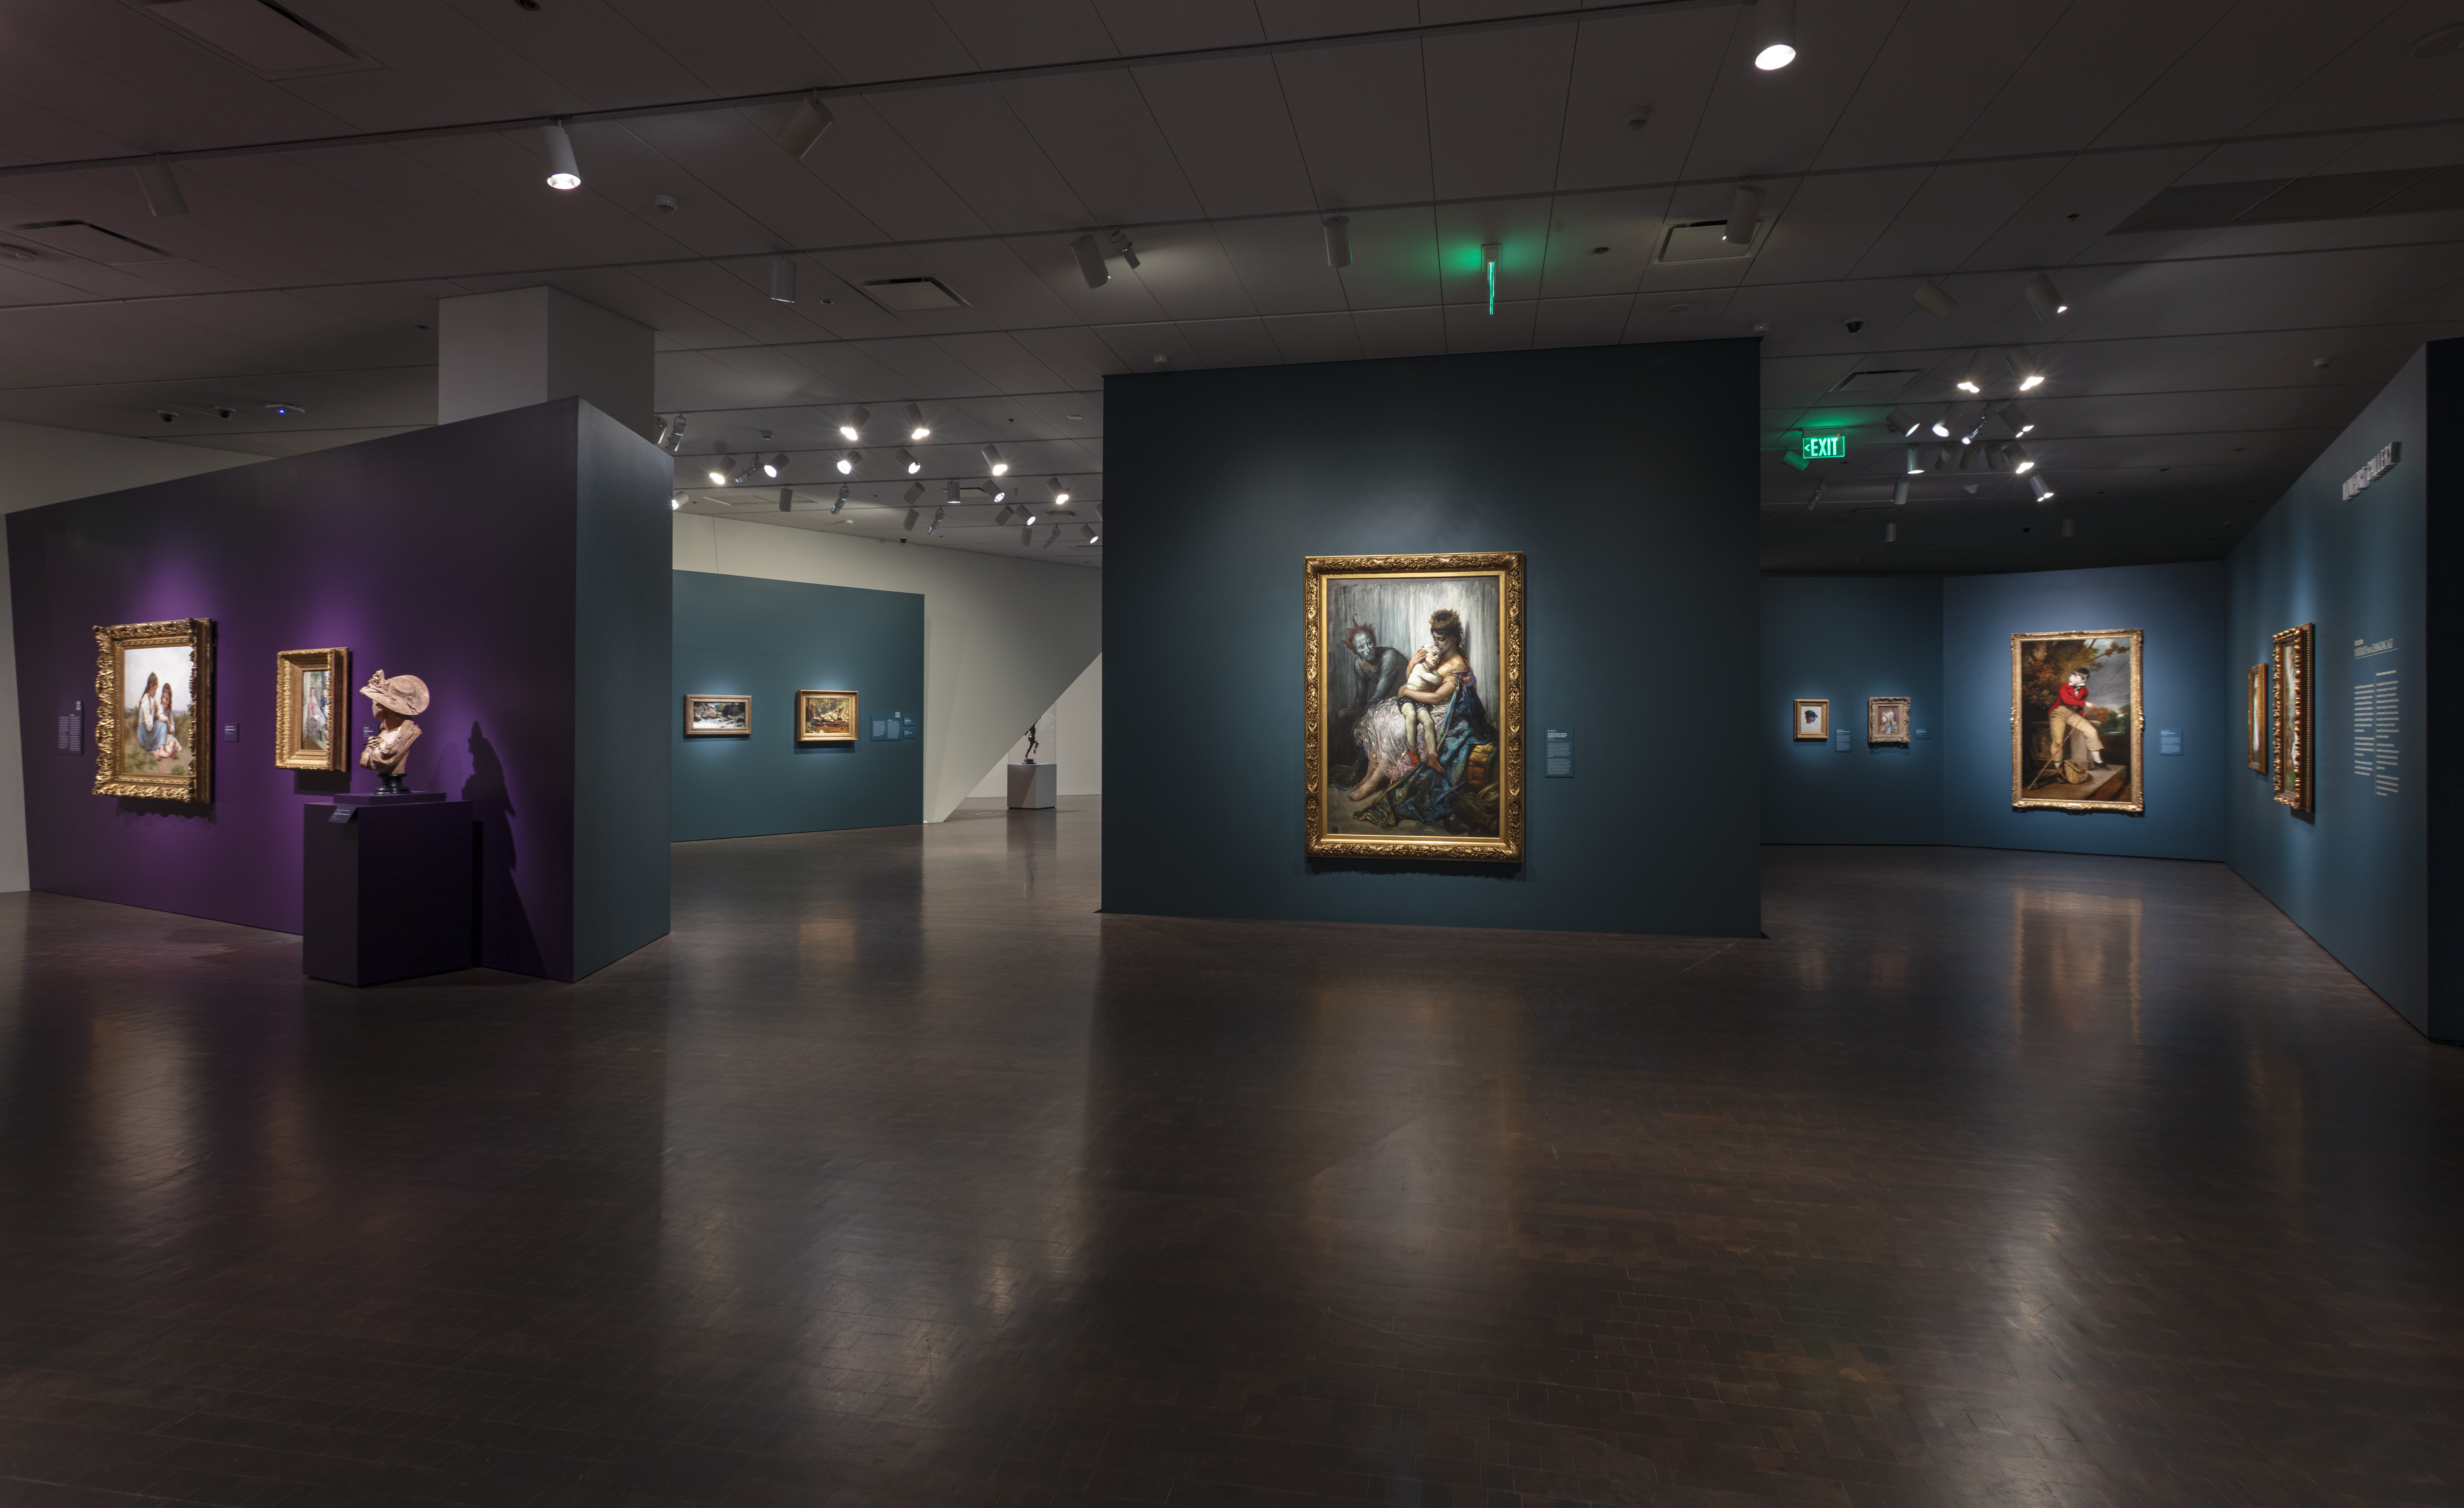 19th century European and American art collection at the Denver Art Museum